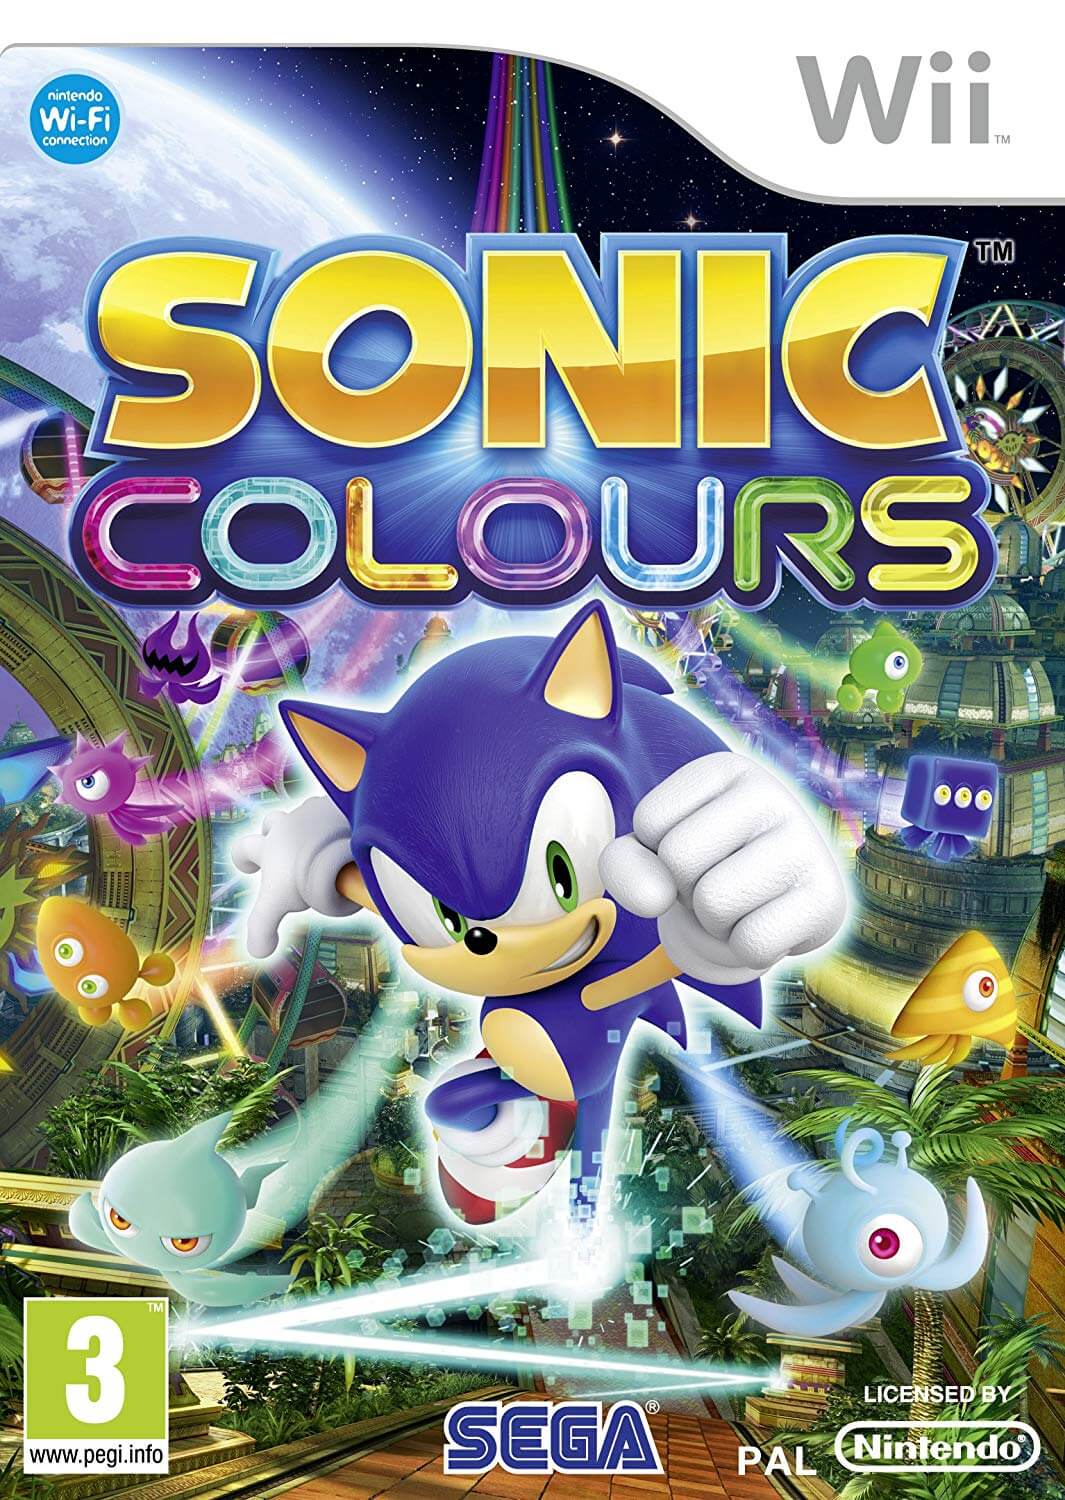 Sonic And The Secret Rings - Nintendo Wii (WII ISOS) ROM - Free Download